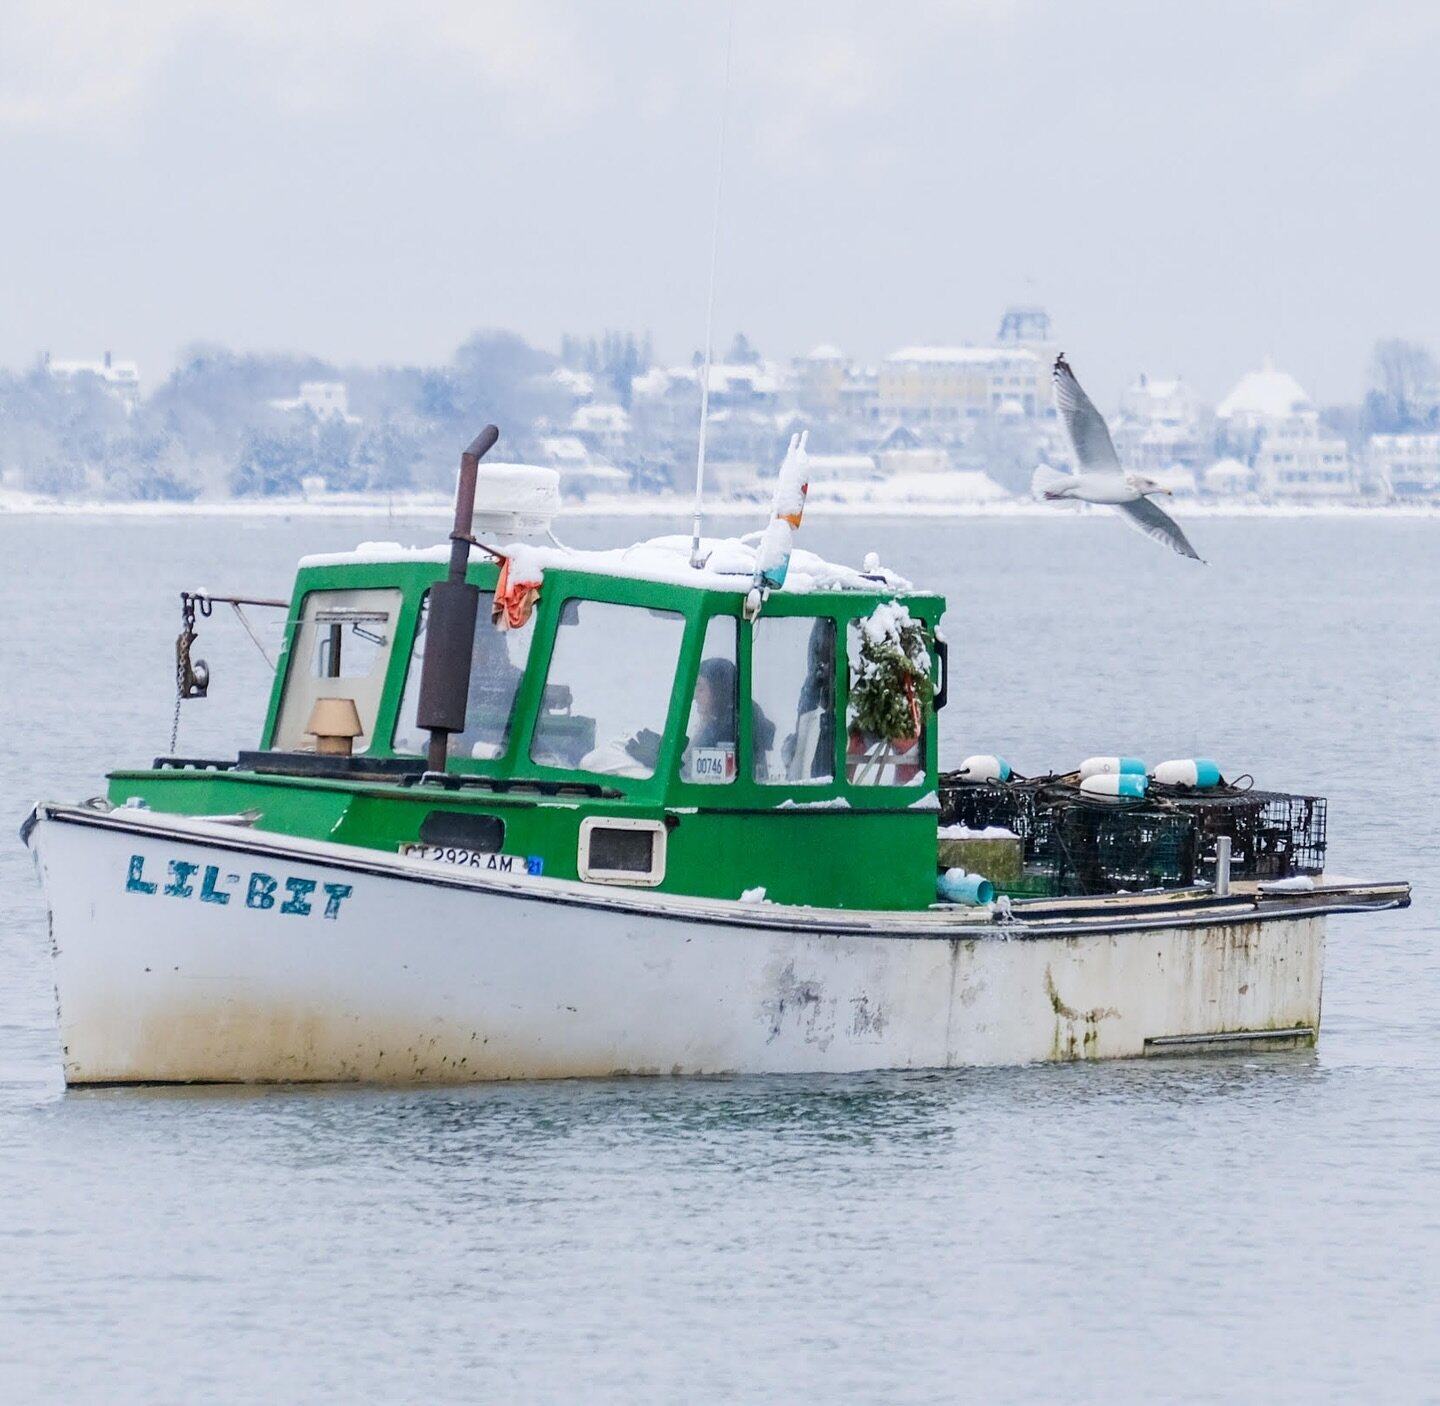 Our fishermen are still at work, even when it&rsquo;s a lil-bit cold!

📸 @thedougabides13 

#stoningtonborough
#stoningtonct
#commercialfishing
#winterinstonington
#snowdays
#freshseafood
#commercialseaport
#fishingforfood
#winteronthewater
#newengl